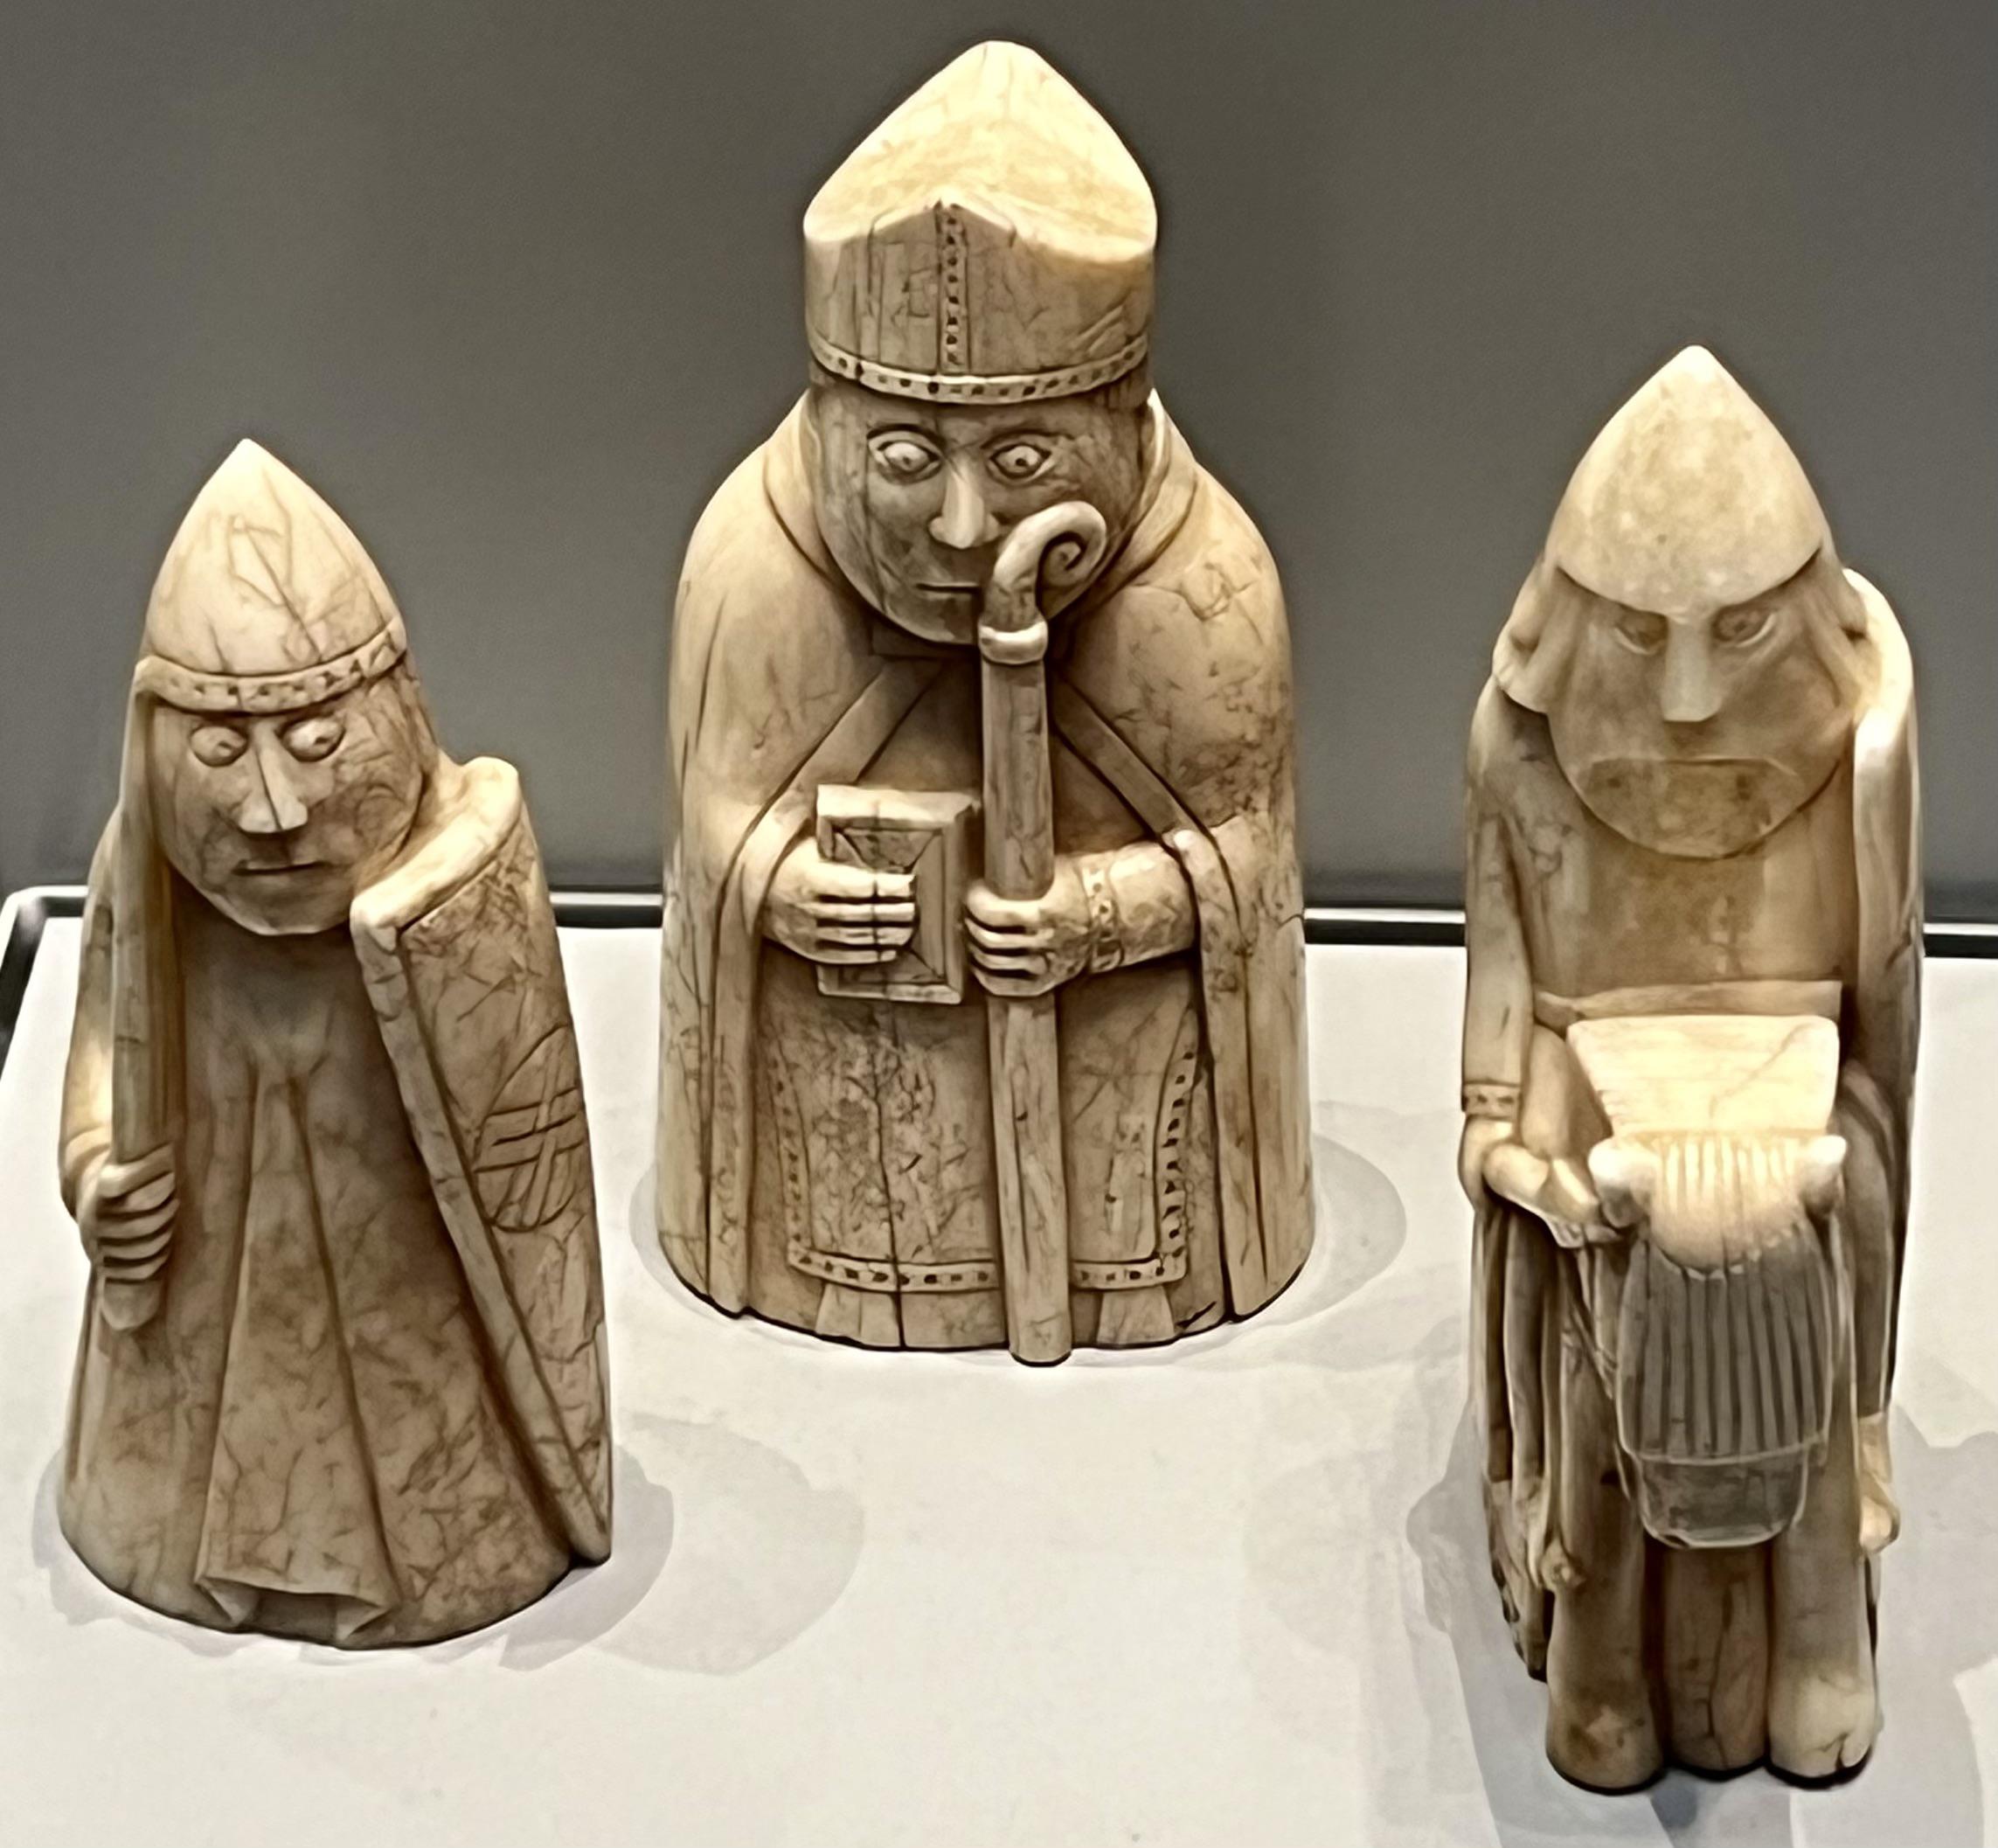 Three of the Lewis chessmen a group of distinctive 12th-century chess pieces, most of which are carved from walrus ivory. Discovered in 1831 on Lewis in the Outer Hebrides of Scotland.jpg